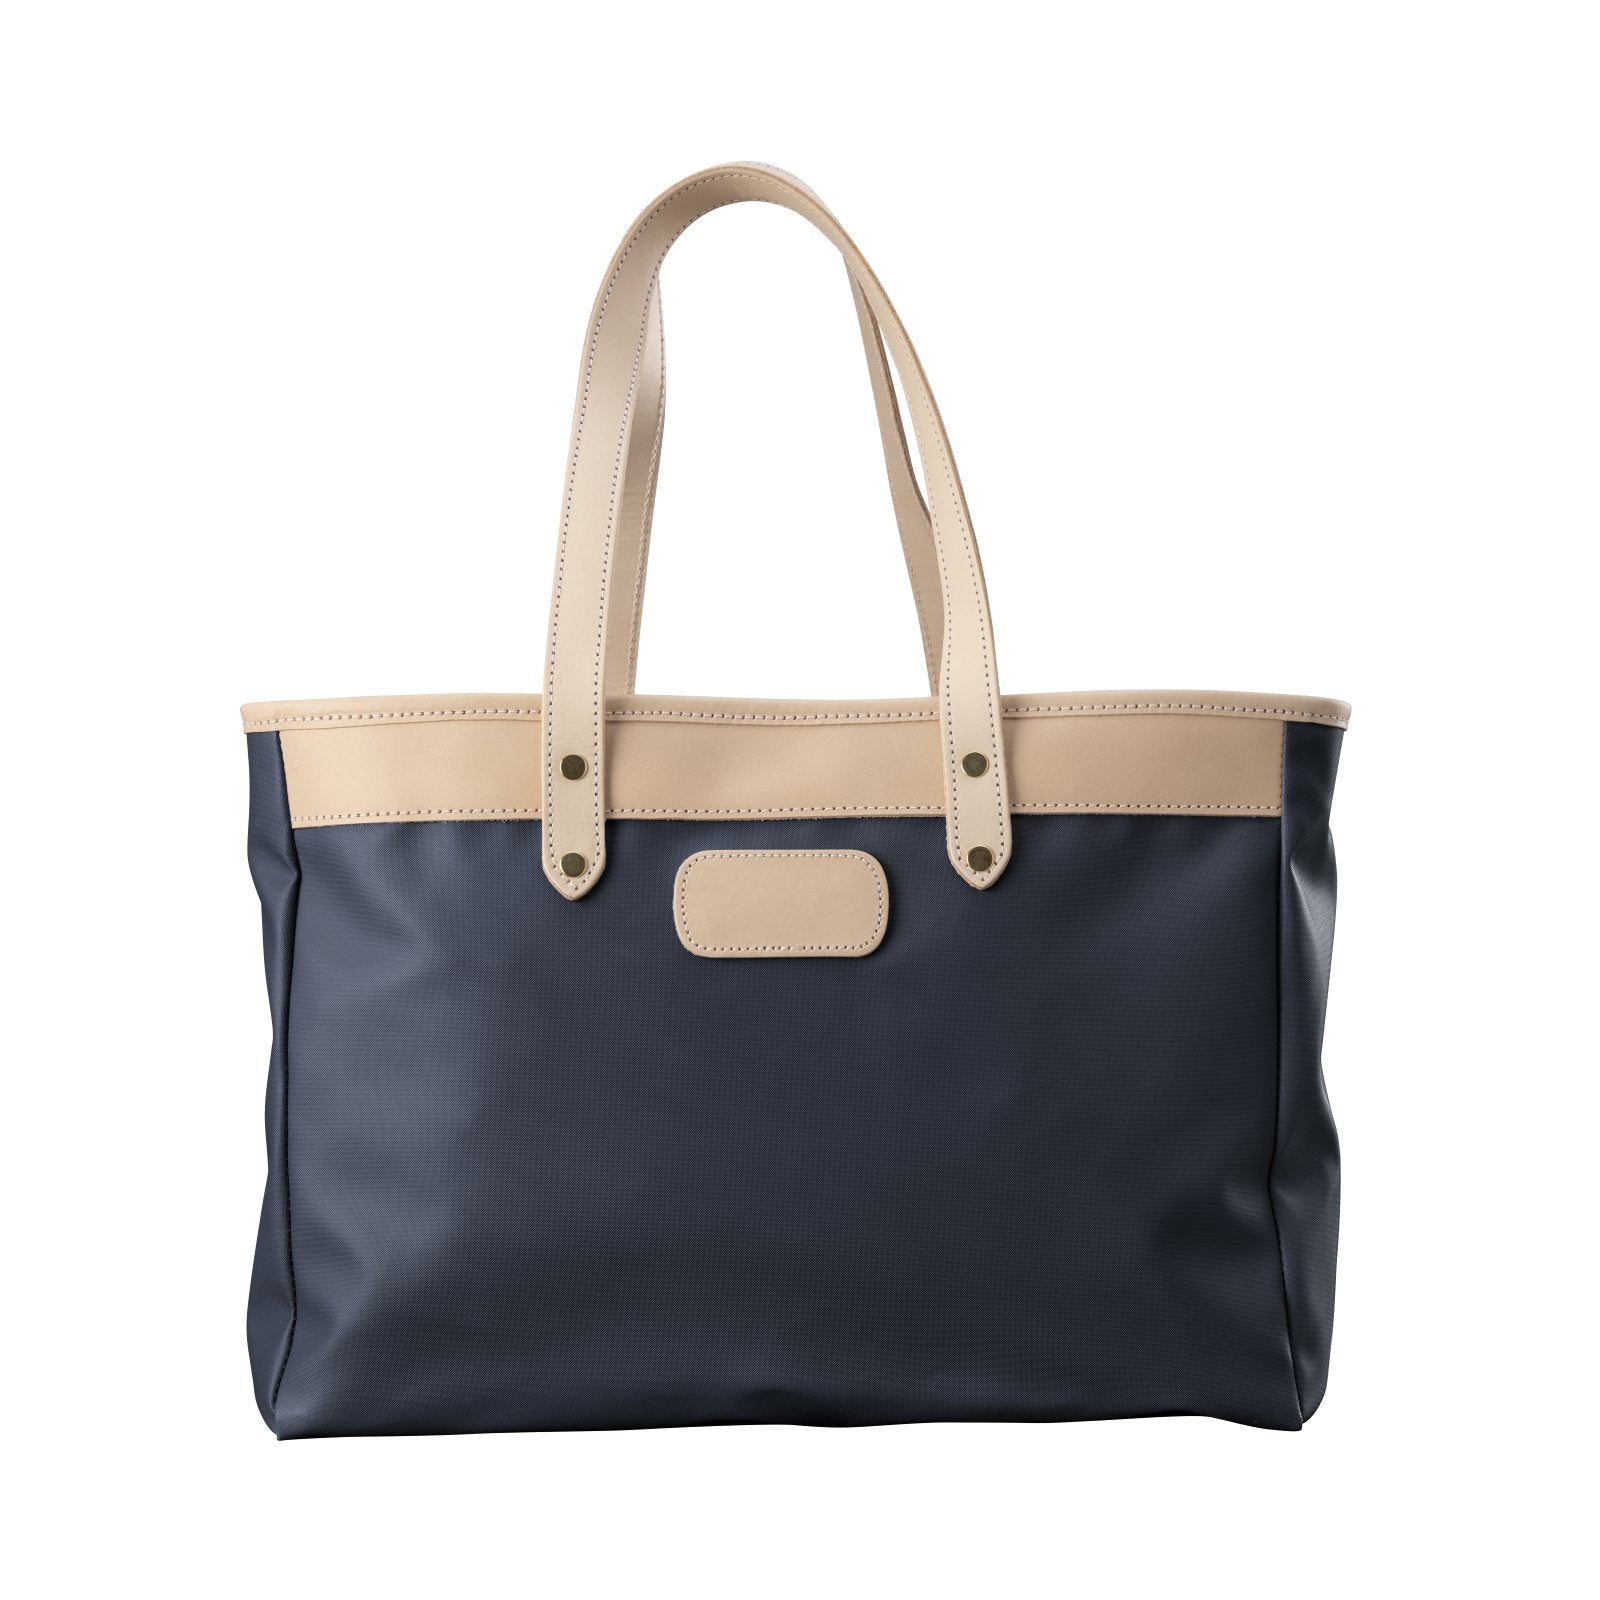 Bebita (Order in any color!) Totes Jon Hart Charcoal Coated Canvas  